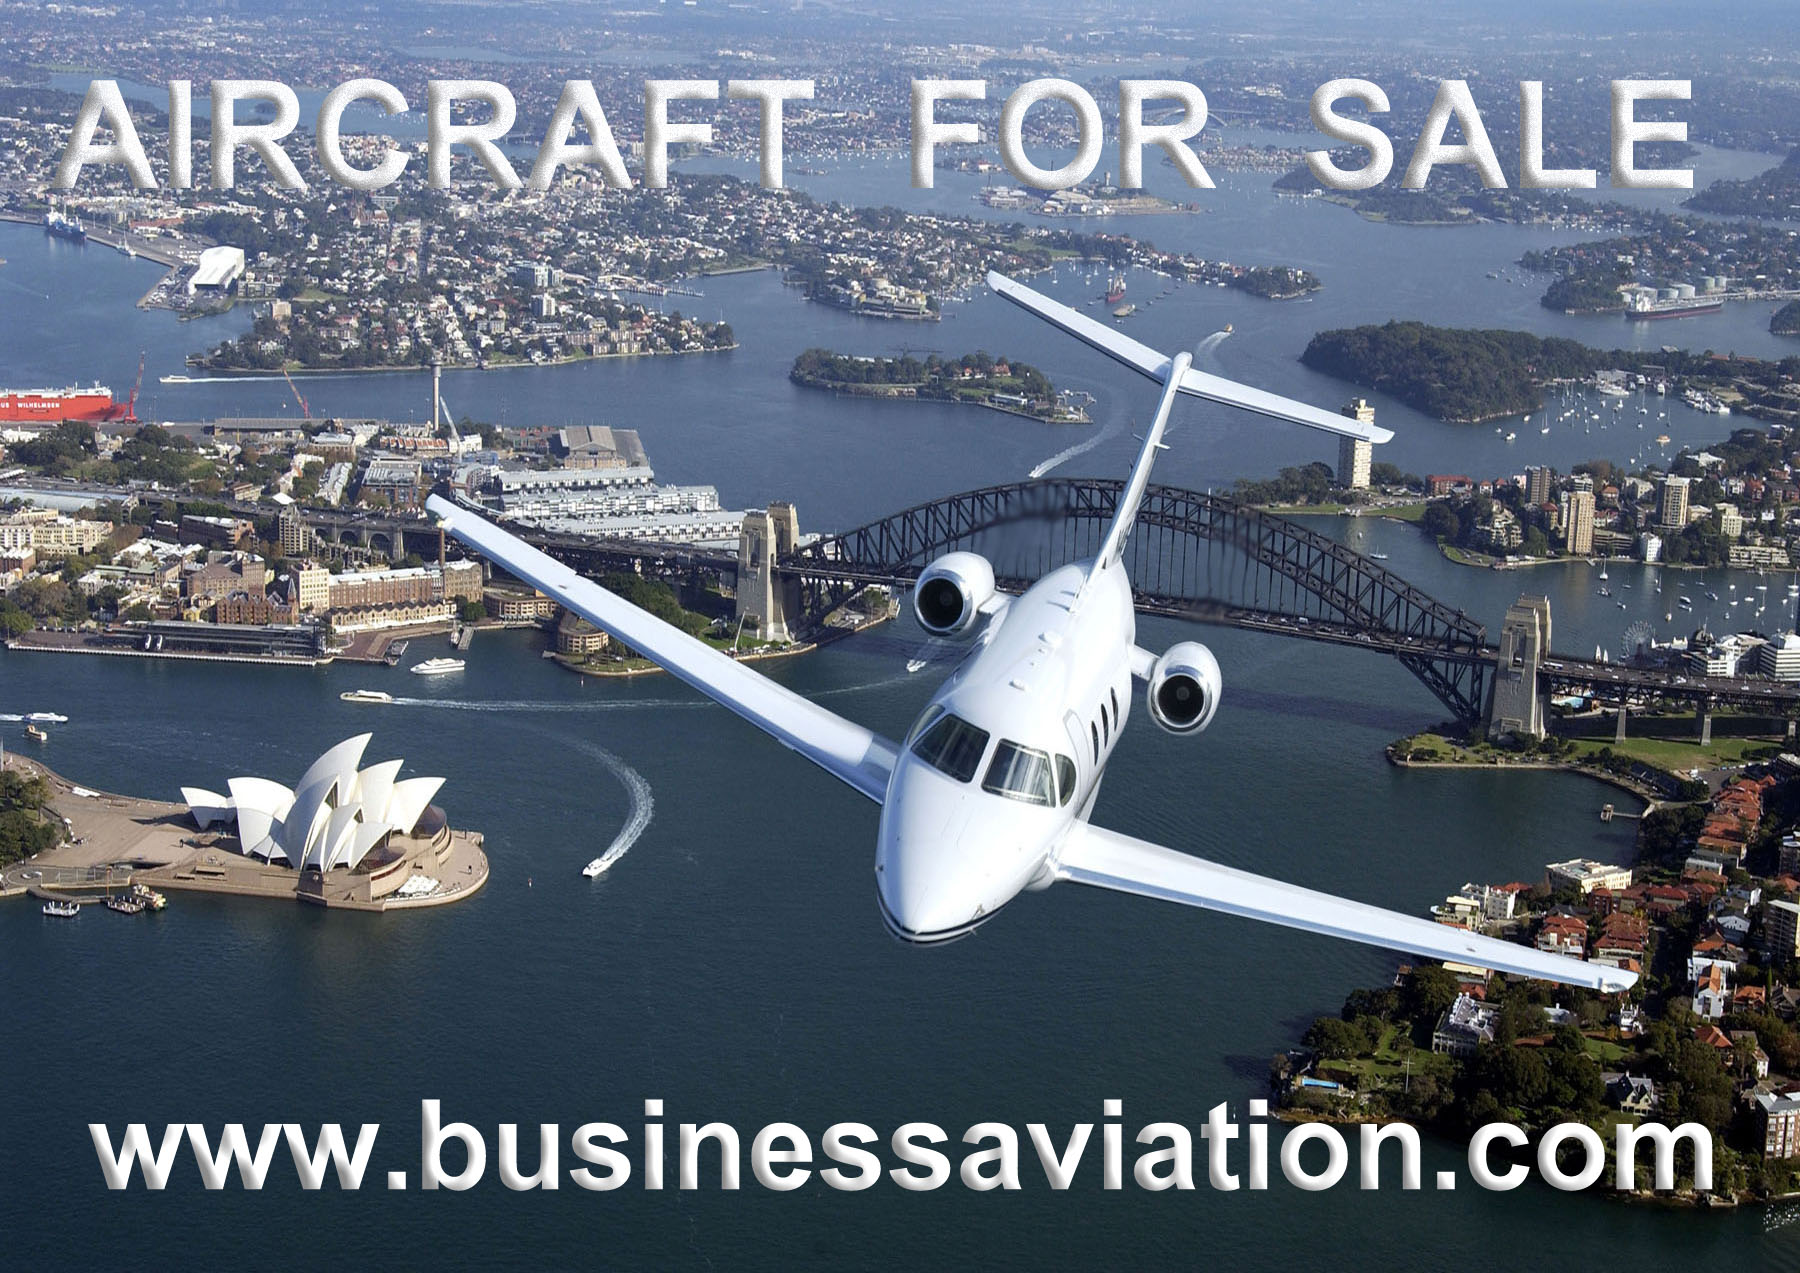 Sales of commercial aircraft: Boeing-737, Airbus-320, Embraer, Twin Otter, Business jets, CRJ-200 Regional Jet